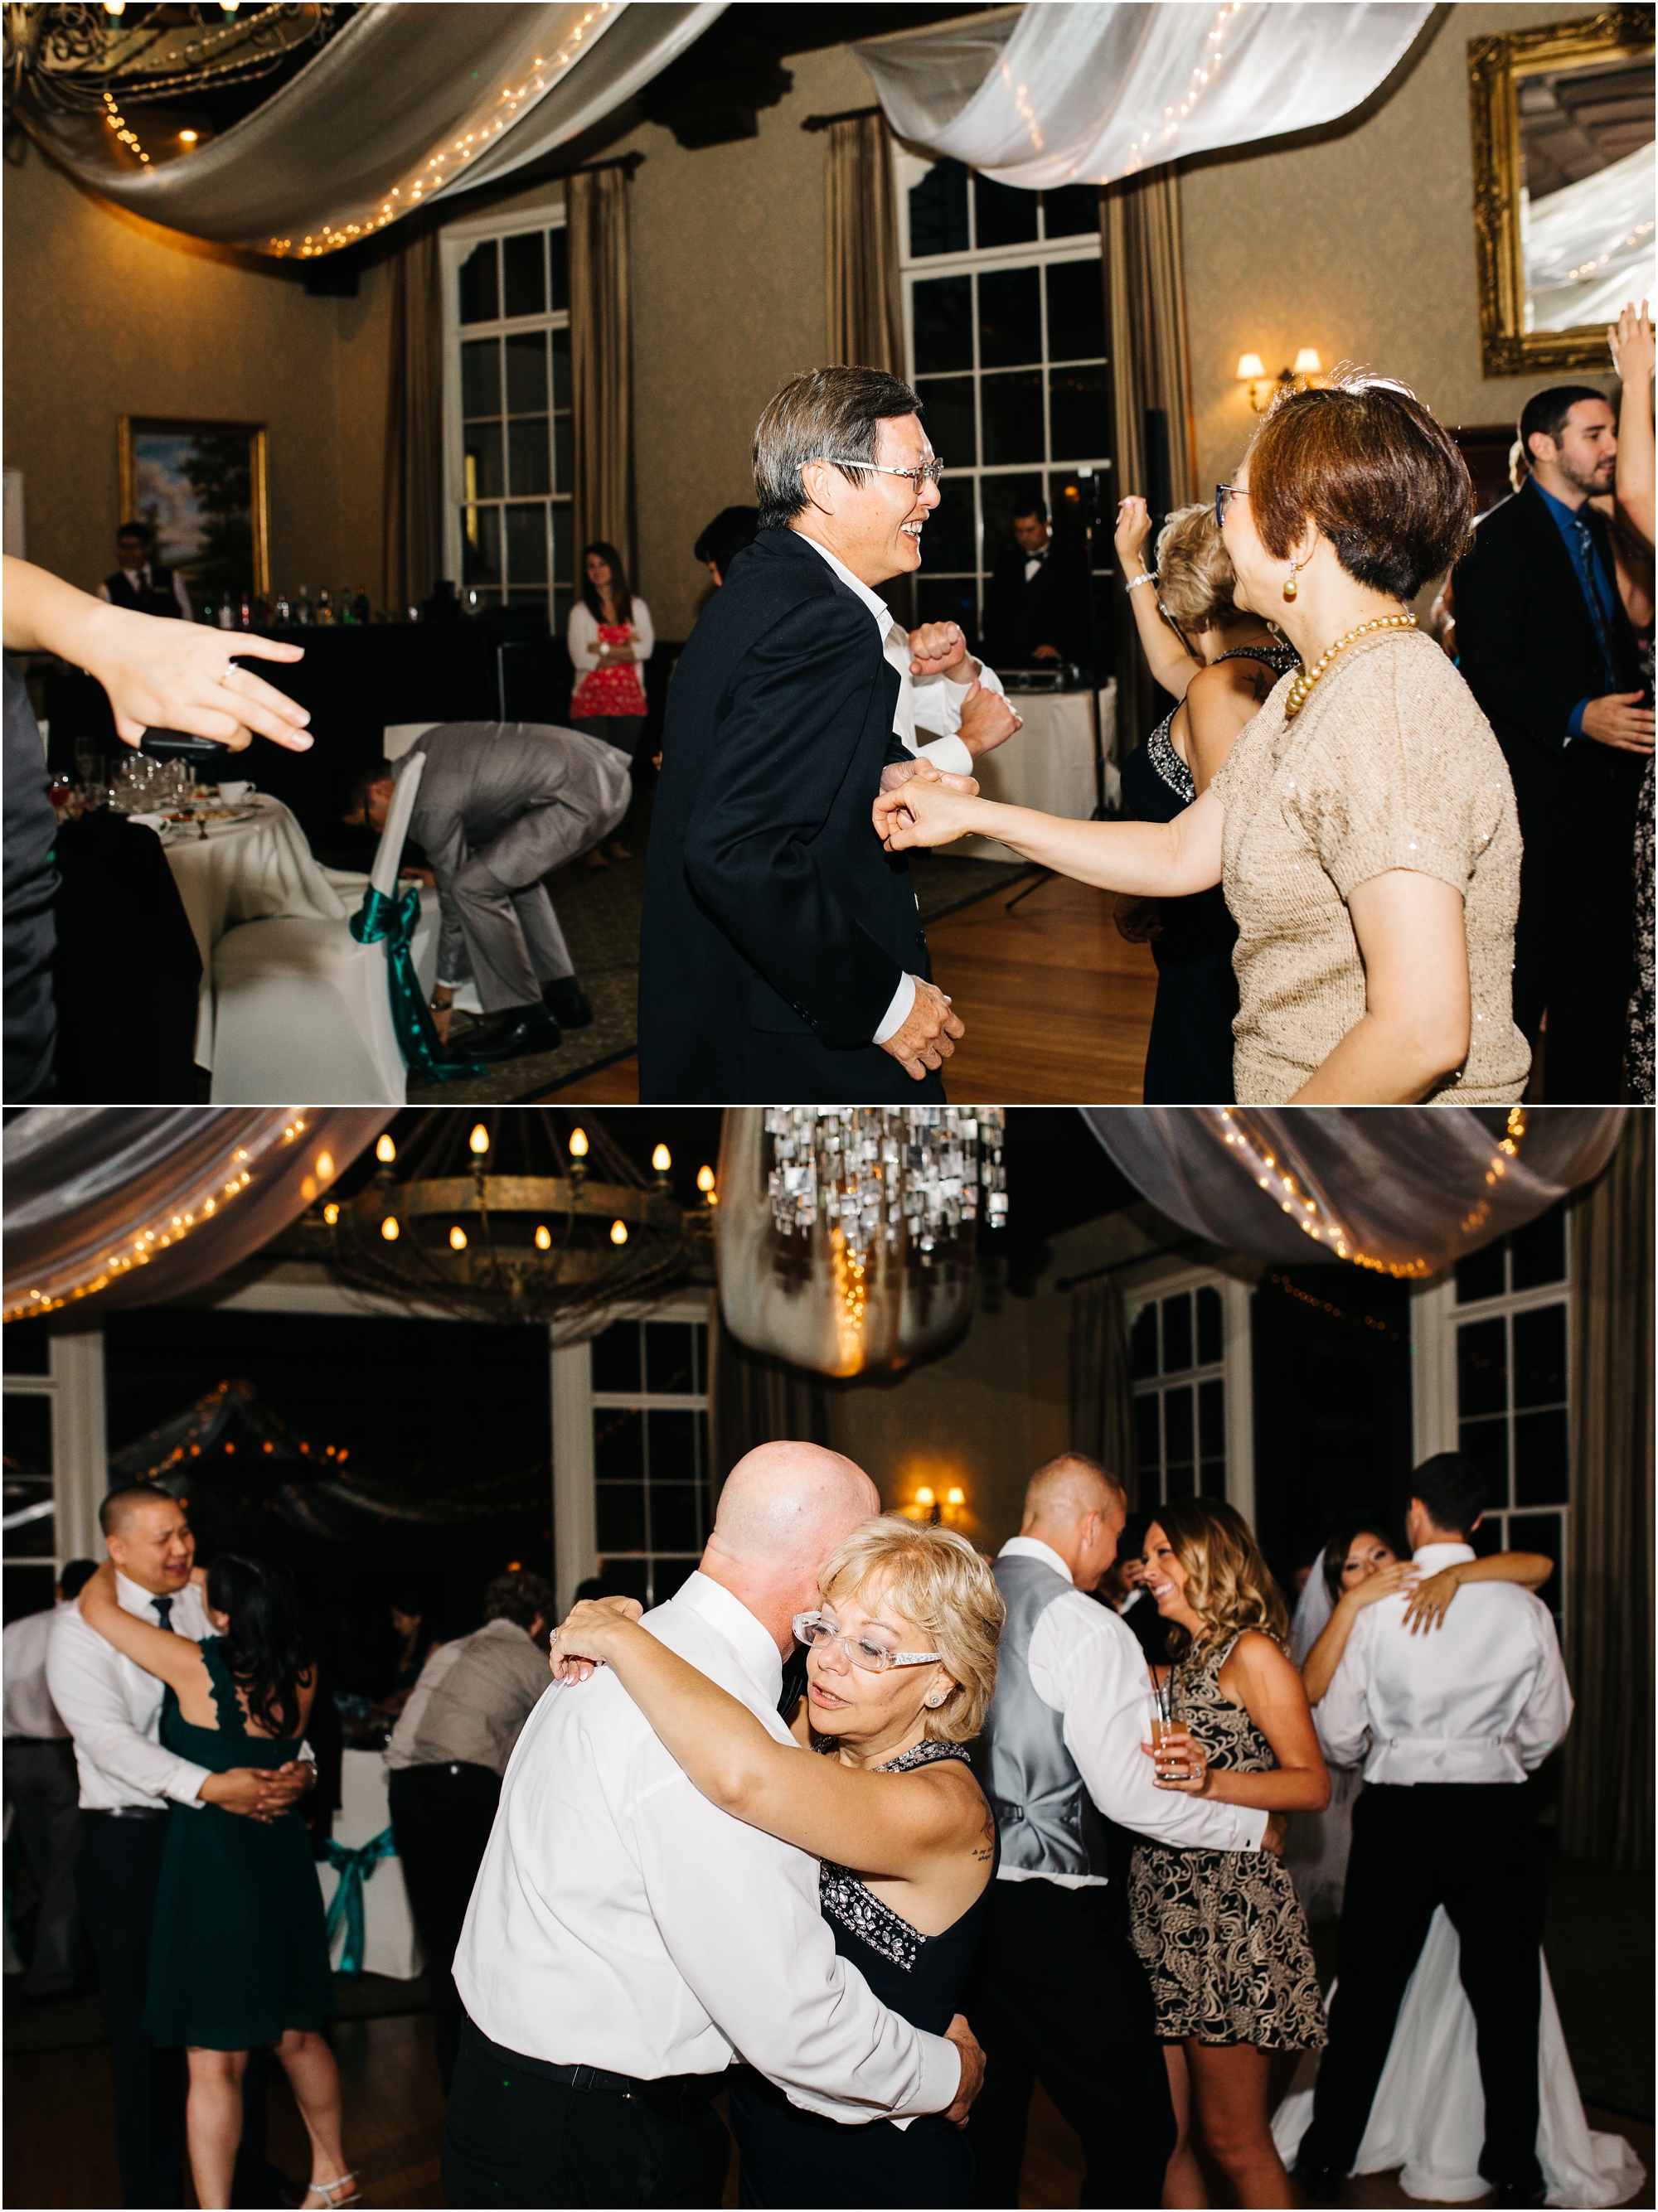 Altadena Town & Country Club Wedding - https://brittneyhannonphotography.com